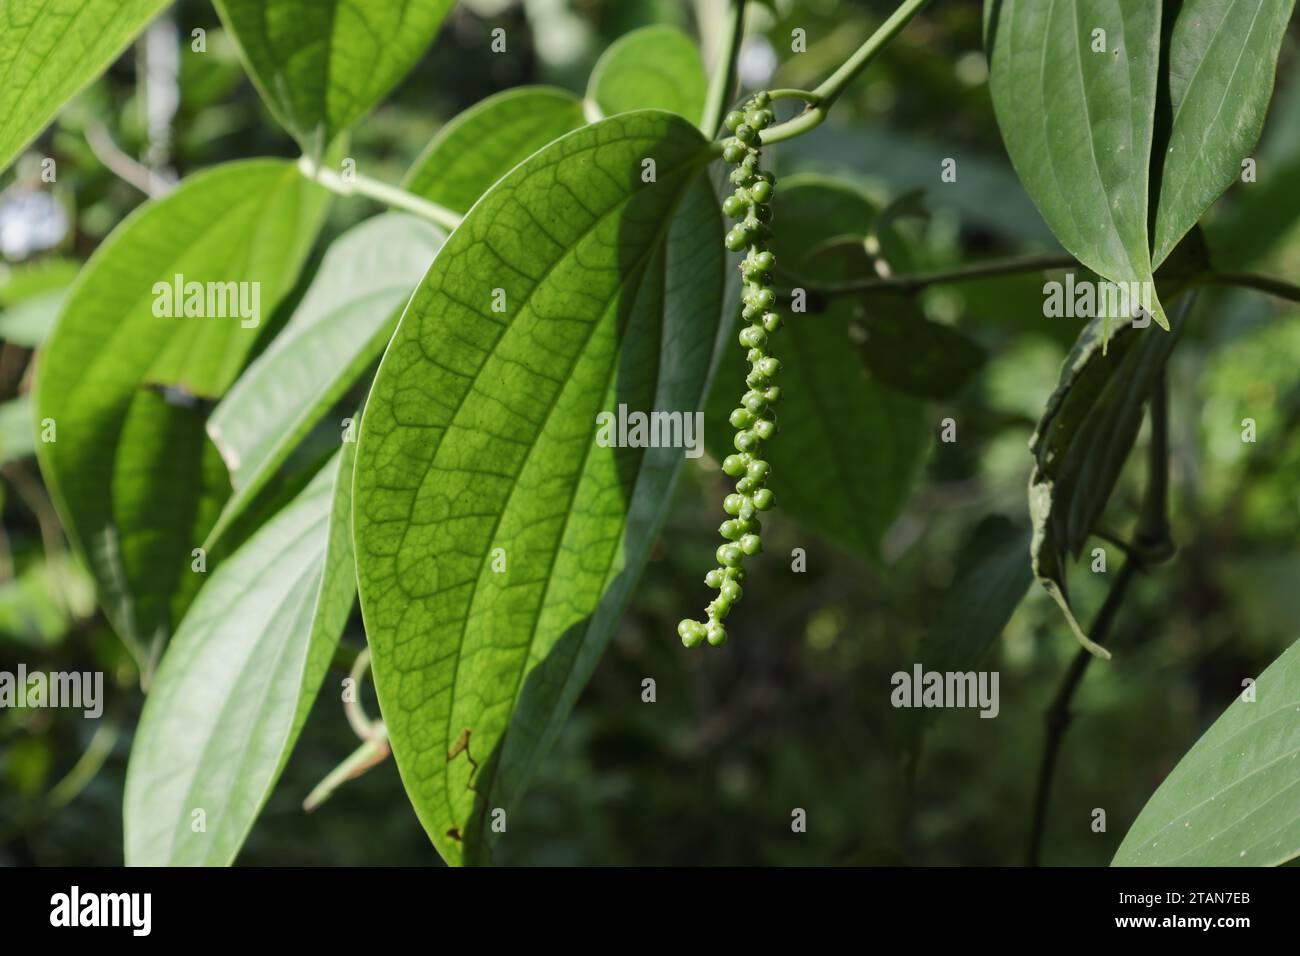 View of an immature Black pepper spike with the green colored fruits (Piper nigrum) is hanging from a vine stem Stock Photo